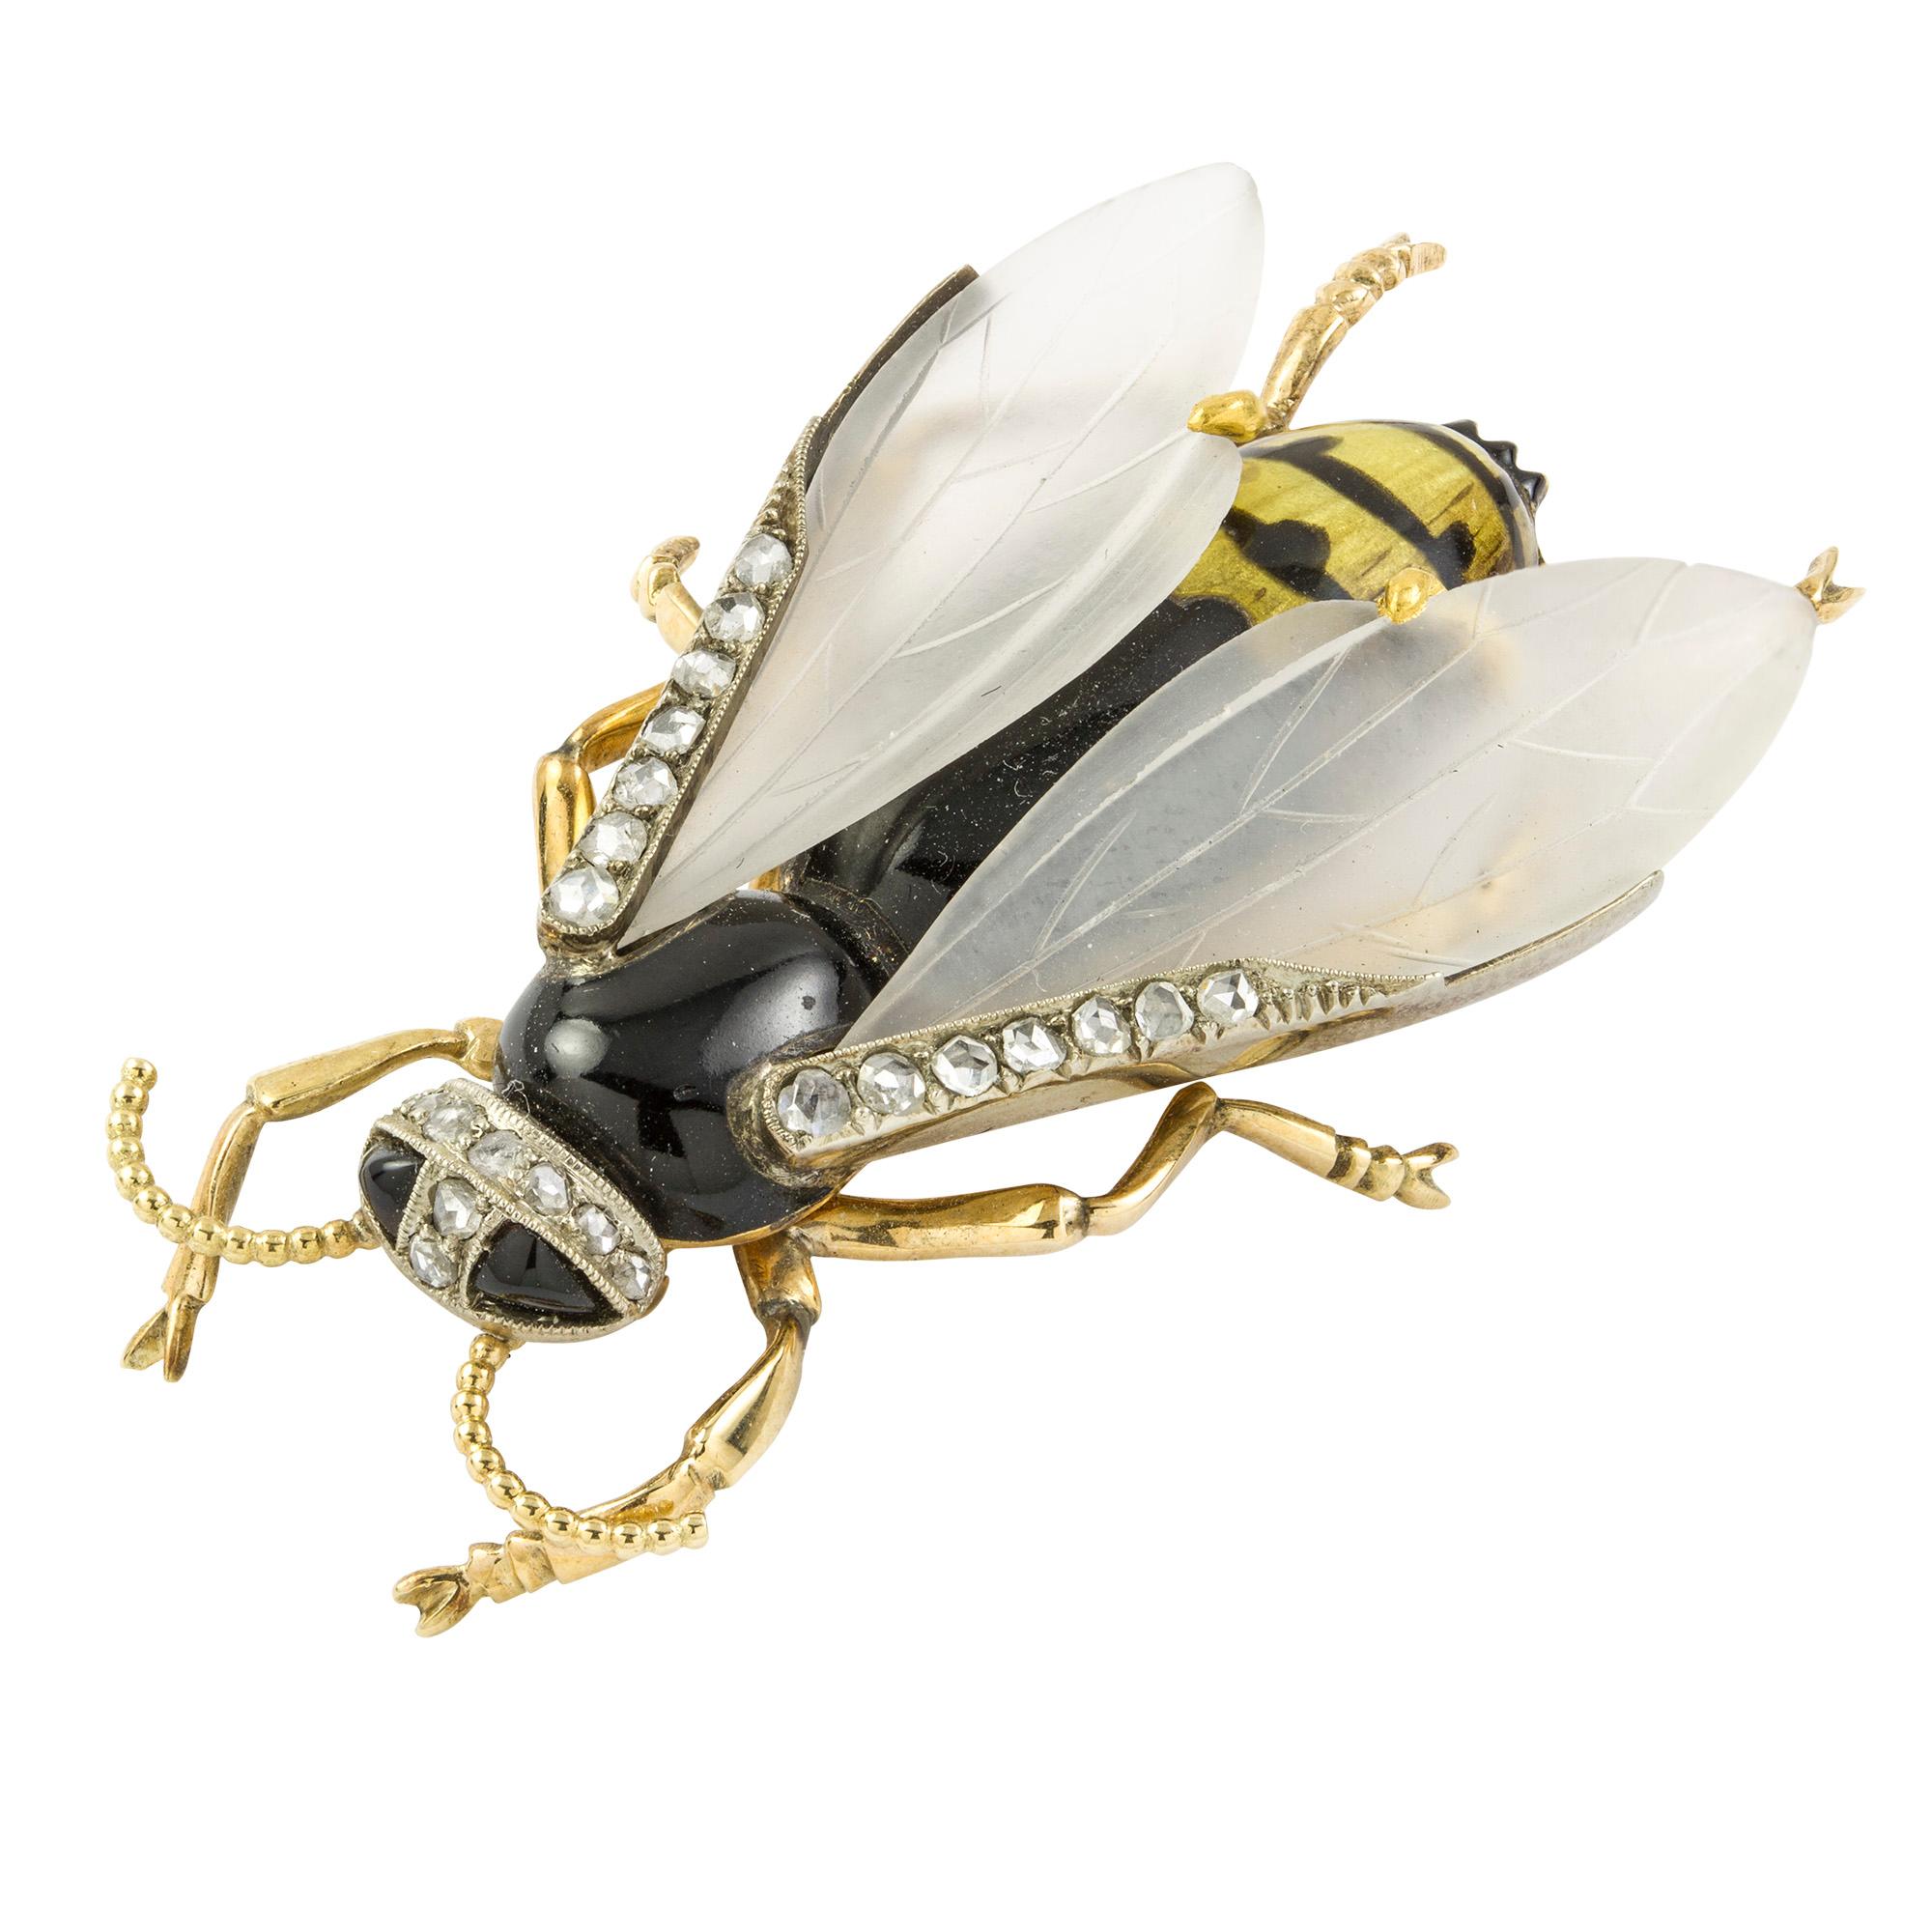 An early twentieth century diamond, enamel and crystal wasp brooch, the black and yellow enamel body with rose-cut diamond-set head, the frosted rock crystal wings with carved veins and rose-cut diamond details, all set in yellow gold and platinum,